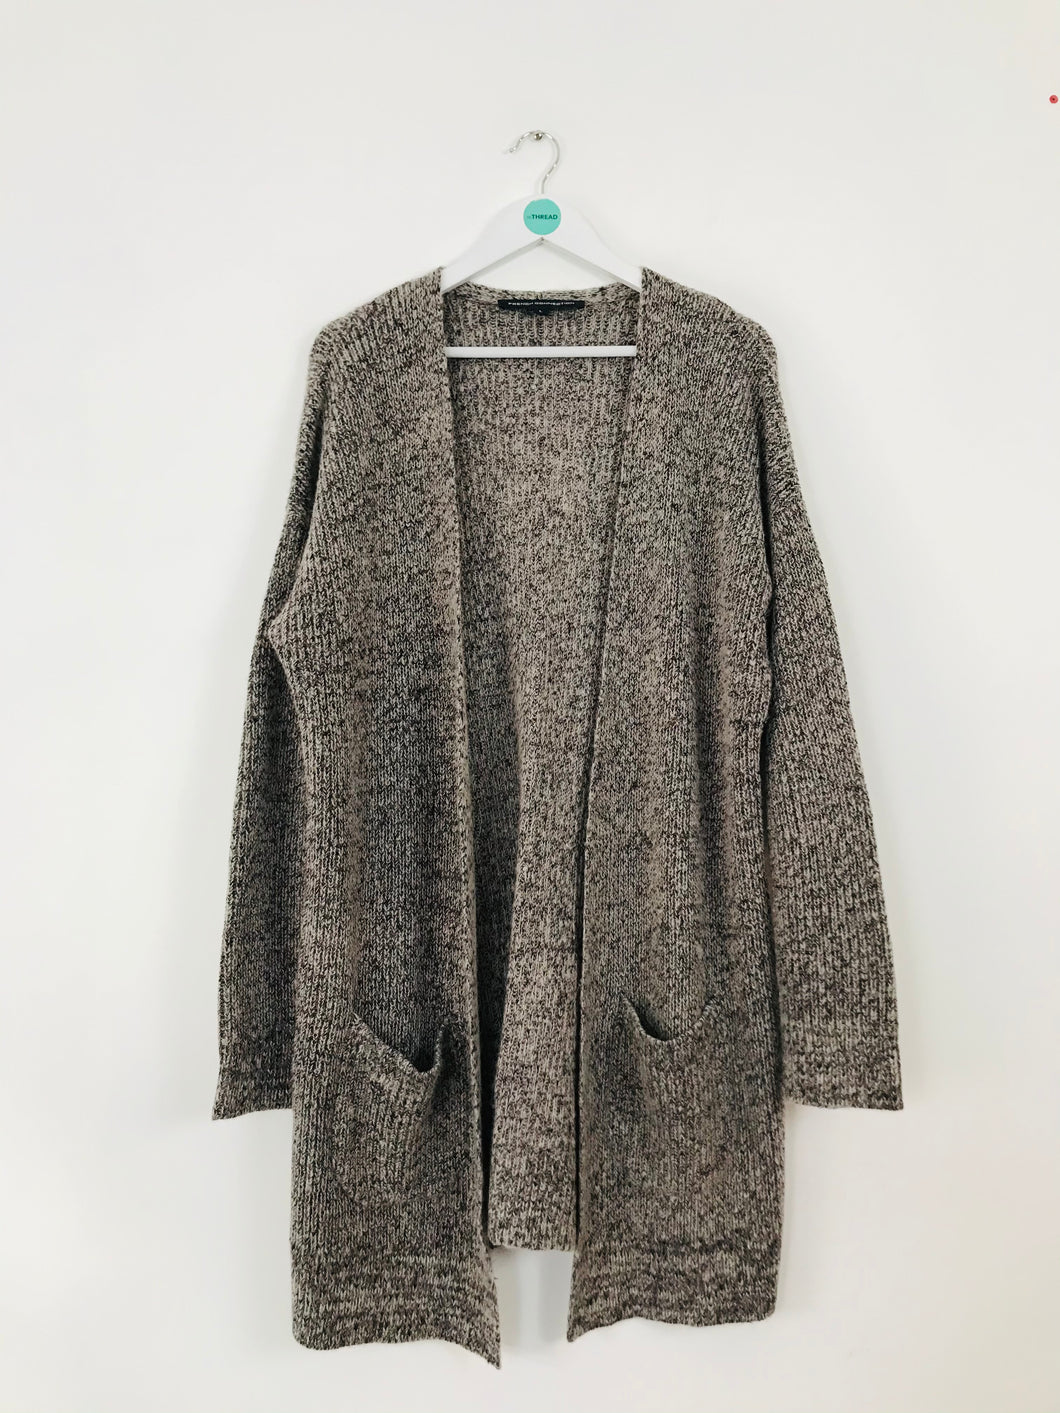 French Connection Women’s Oversized Longline Knit Cardigan | L | Grey Brown